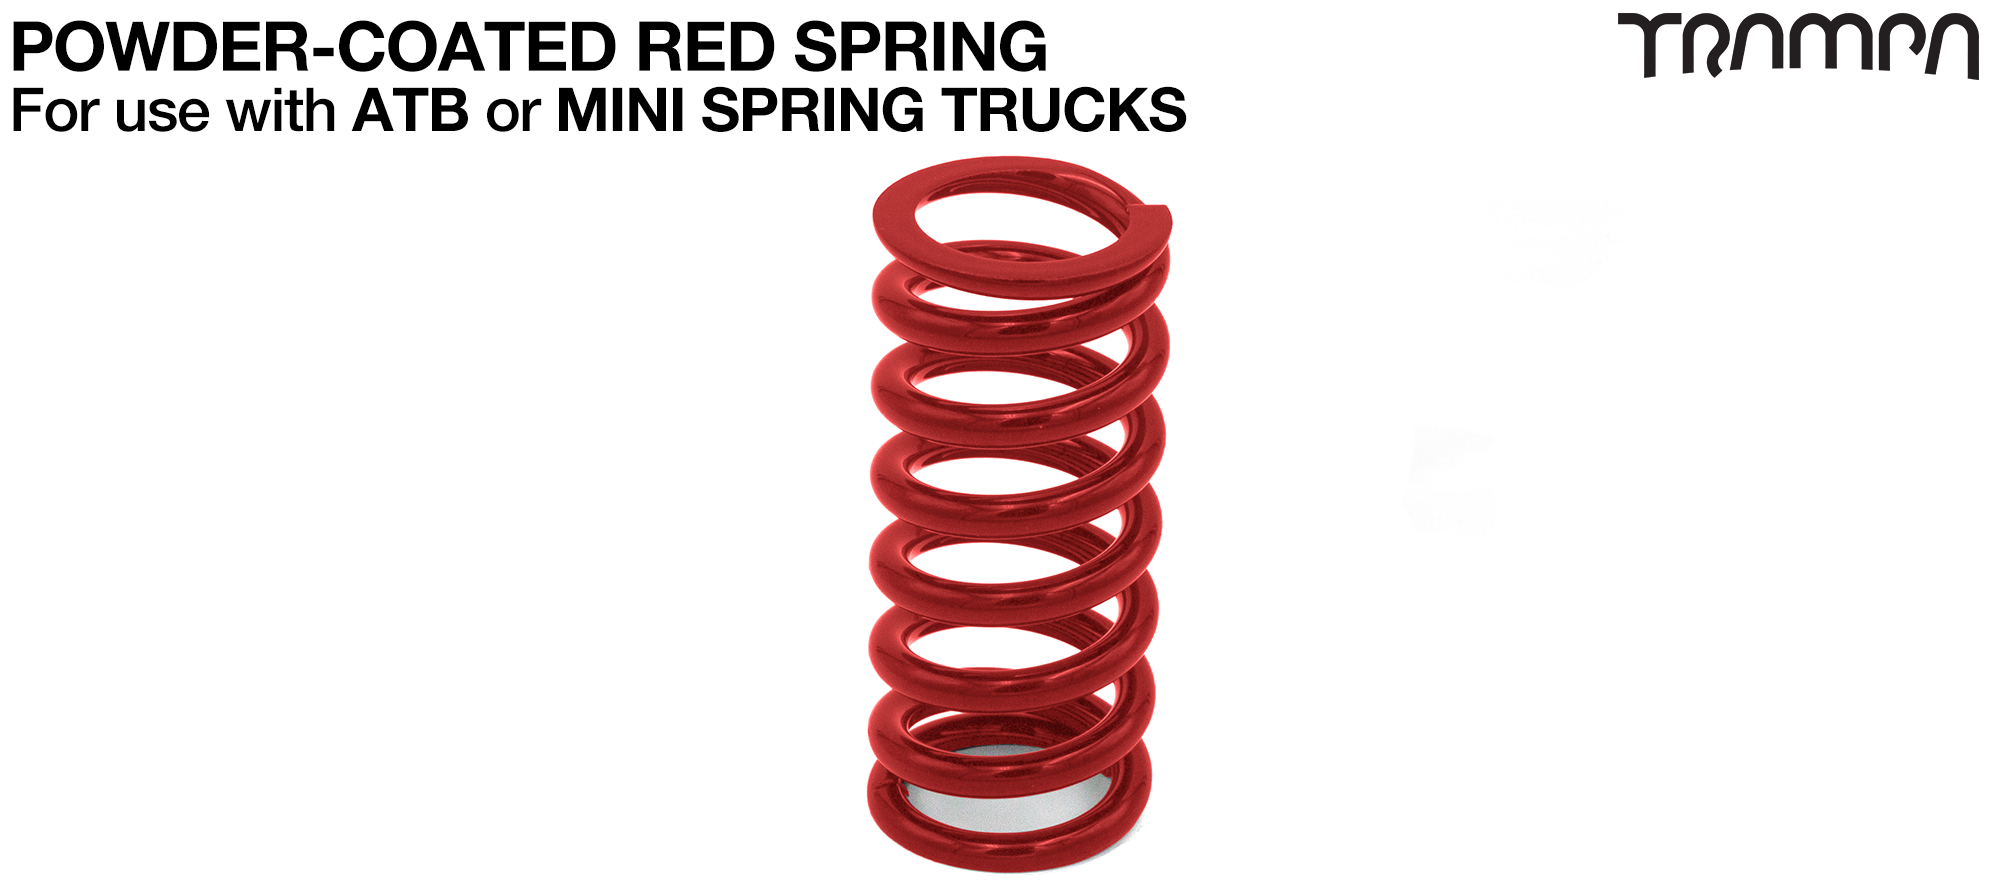 Steel Spring Powder Coated - RED